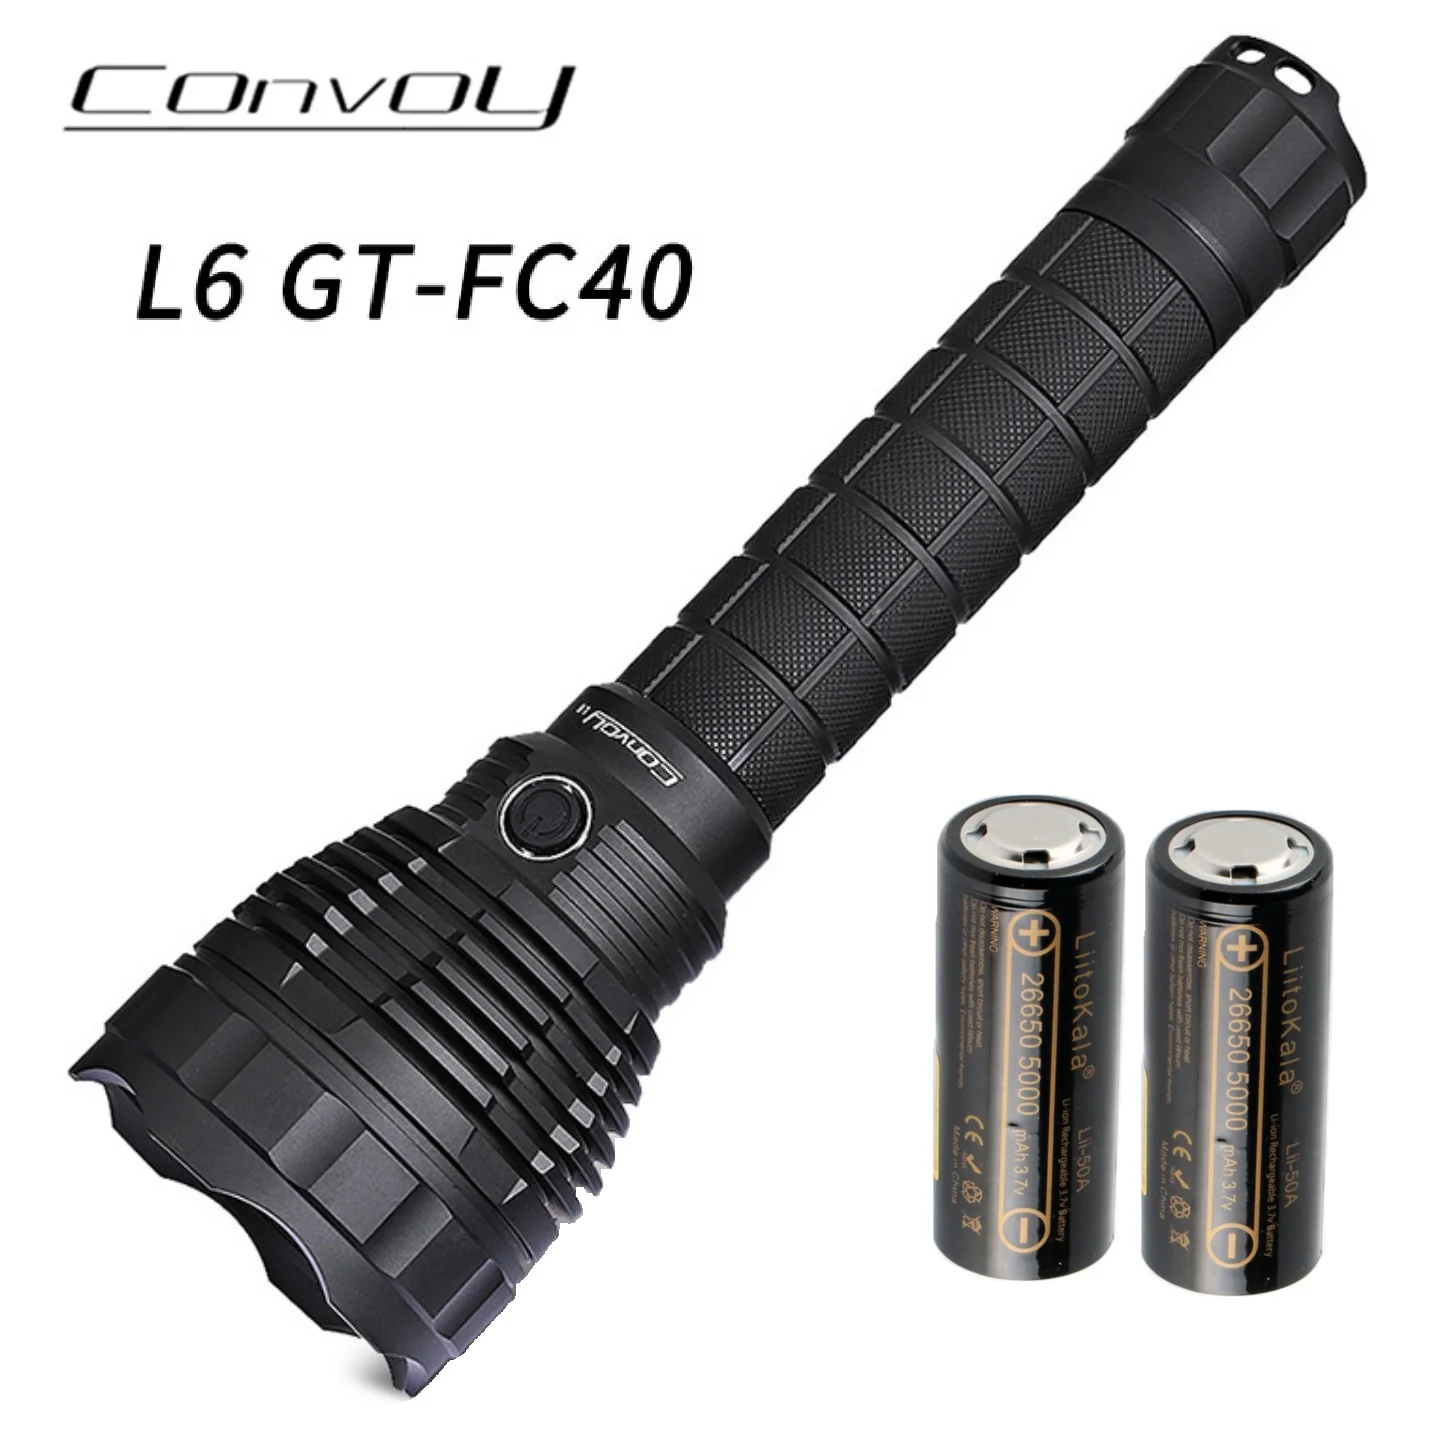 Convoy L6 GT-FC40 High Powerful LED Flashlight 3500LM Lanterna  Police Light by 26650 Battery for Hunting Camping Outdoor Sports